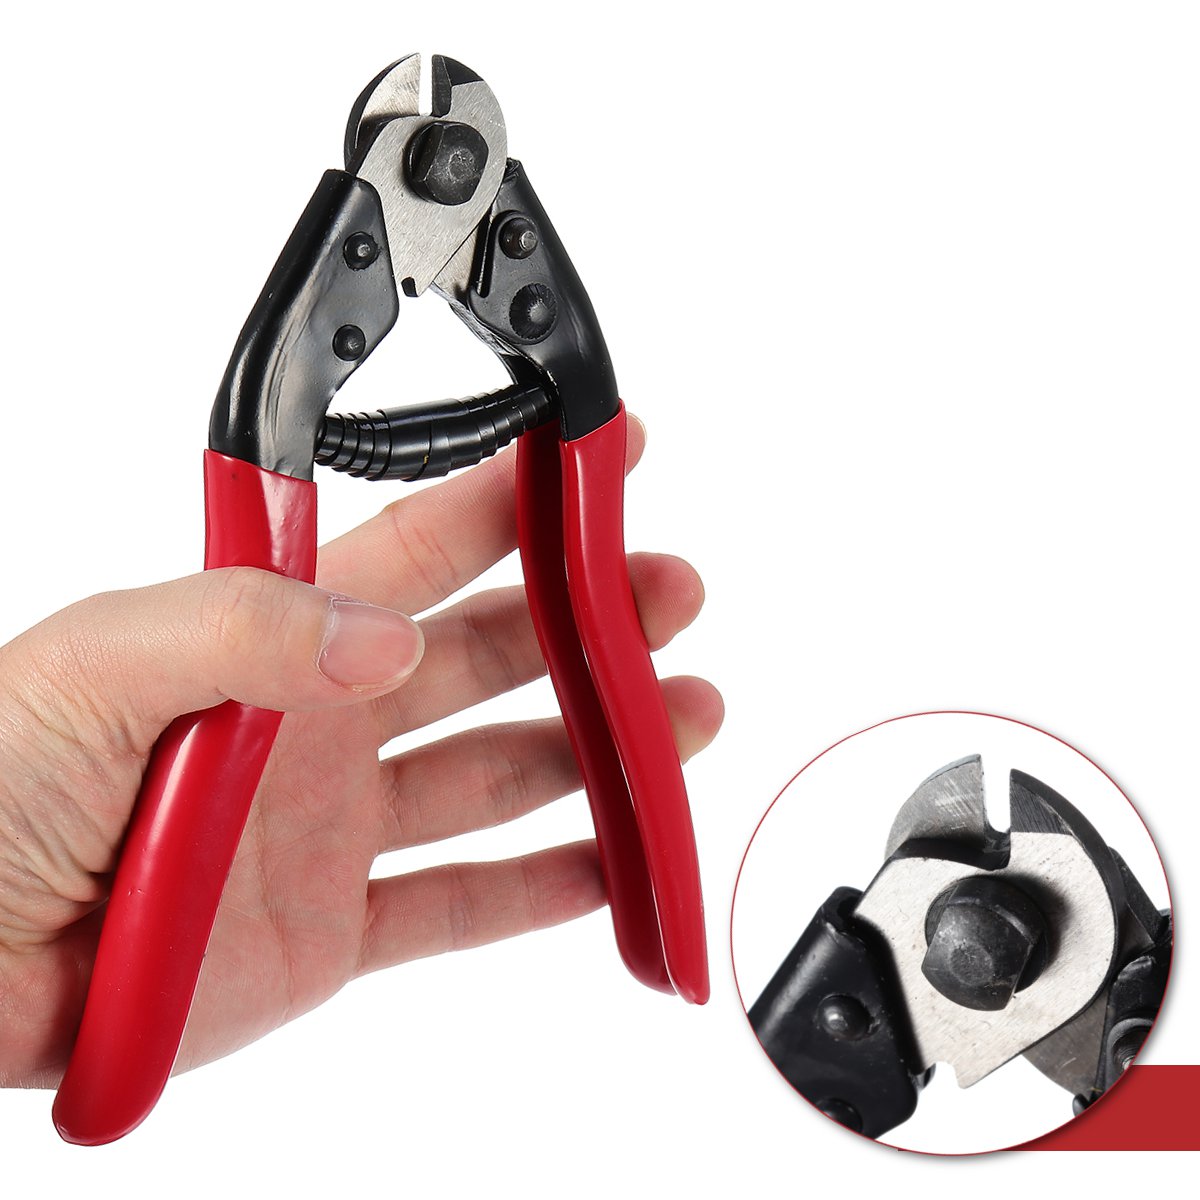 

8 Inch Steel Wire Cutting Pliers Cable Side Cutter Electrician Grip Tool 0.1-2.2mm